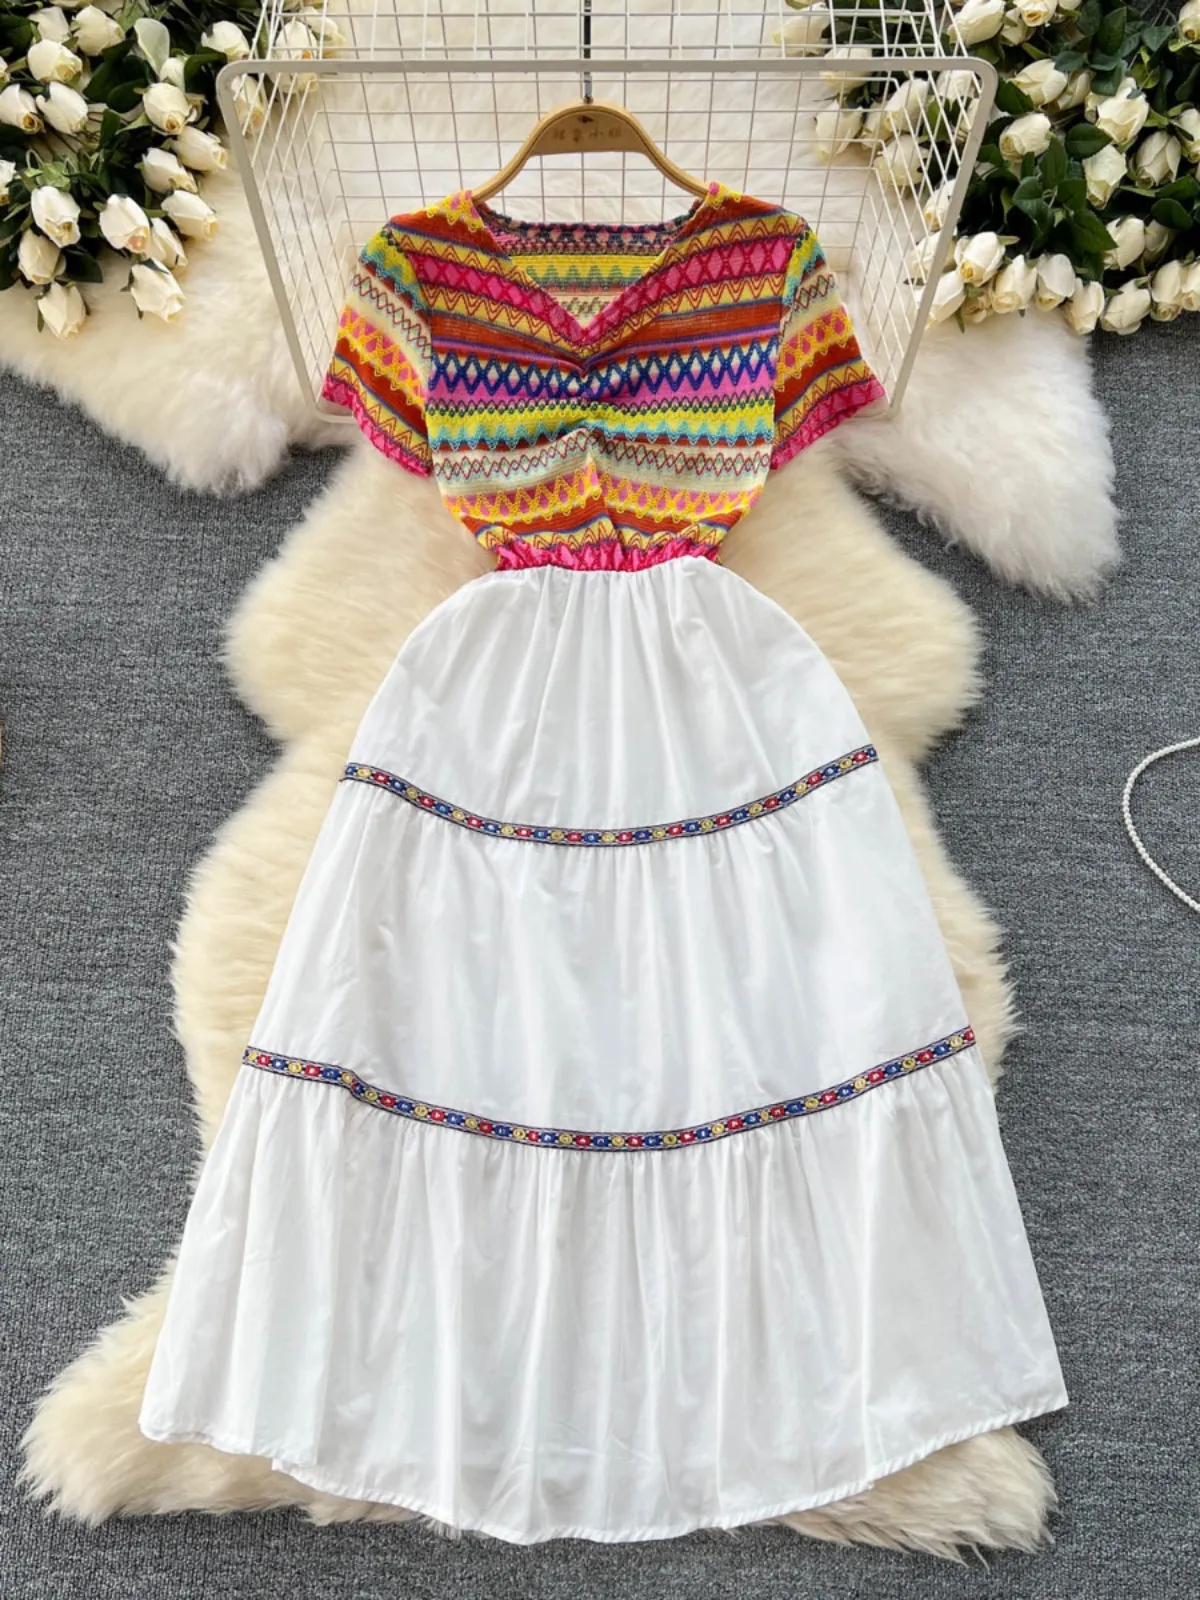 Yunnan Tourism Holiday Dress Women's Design Sense Embroidered Knitted Spliced Waist Slimming French First Love Dress